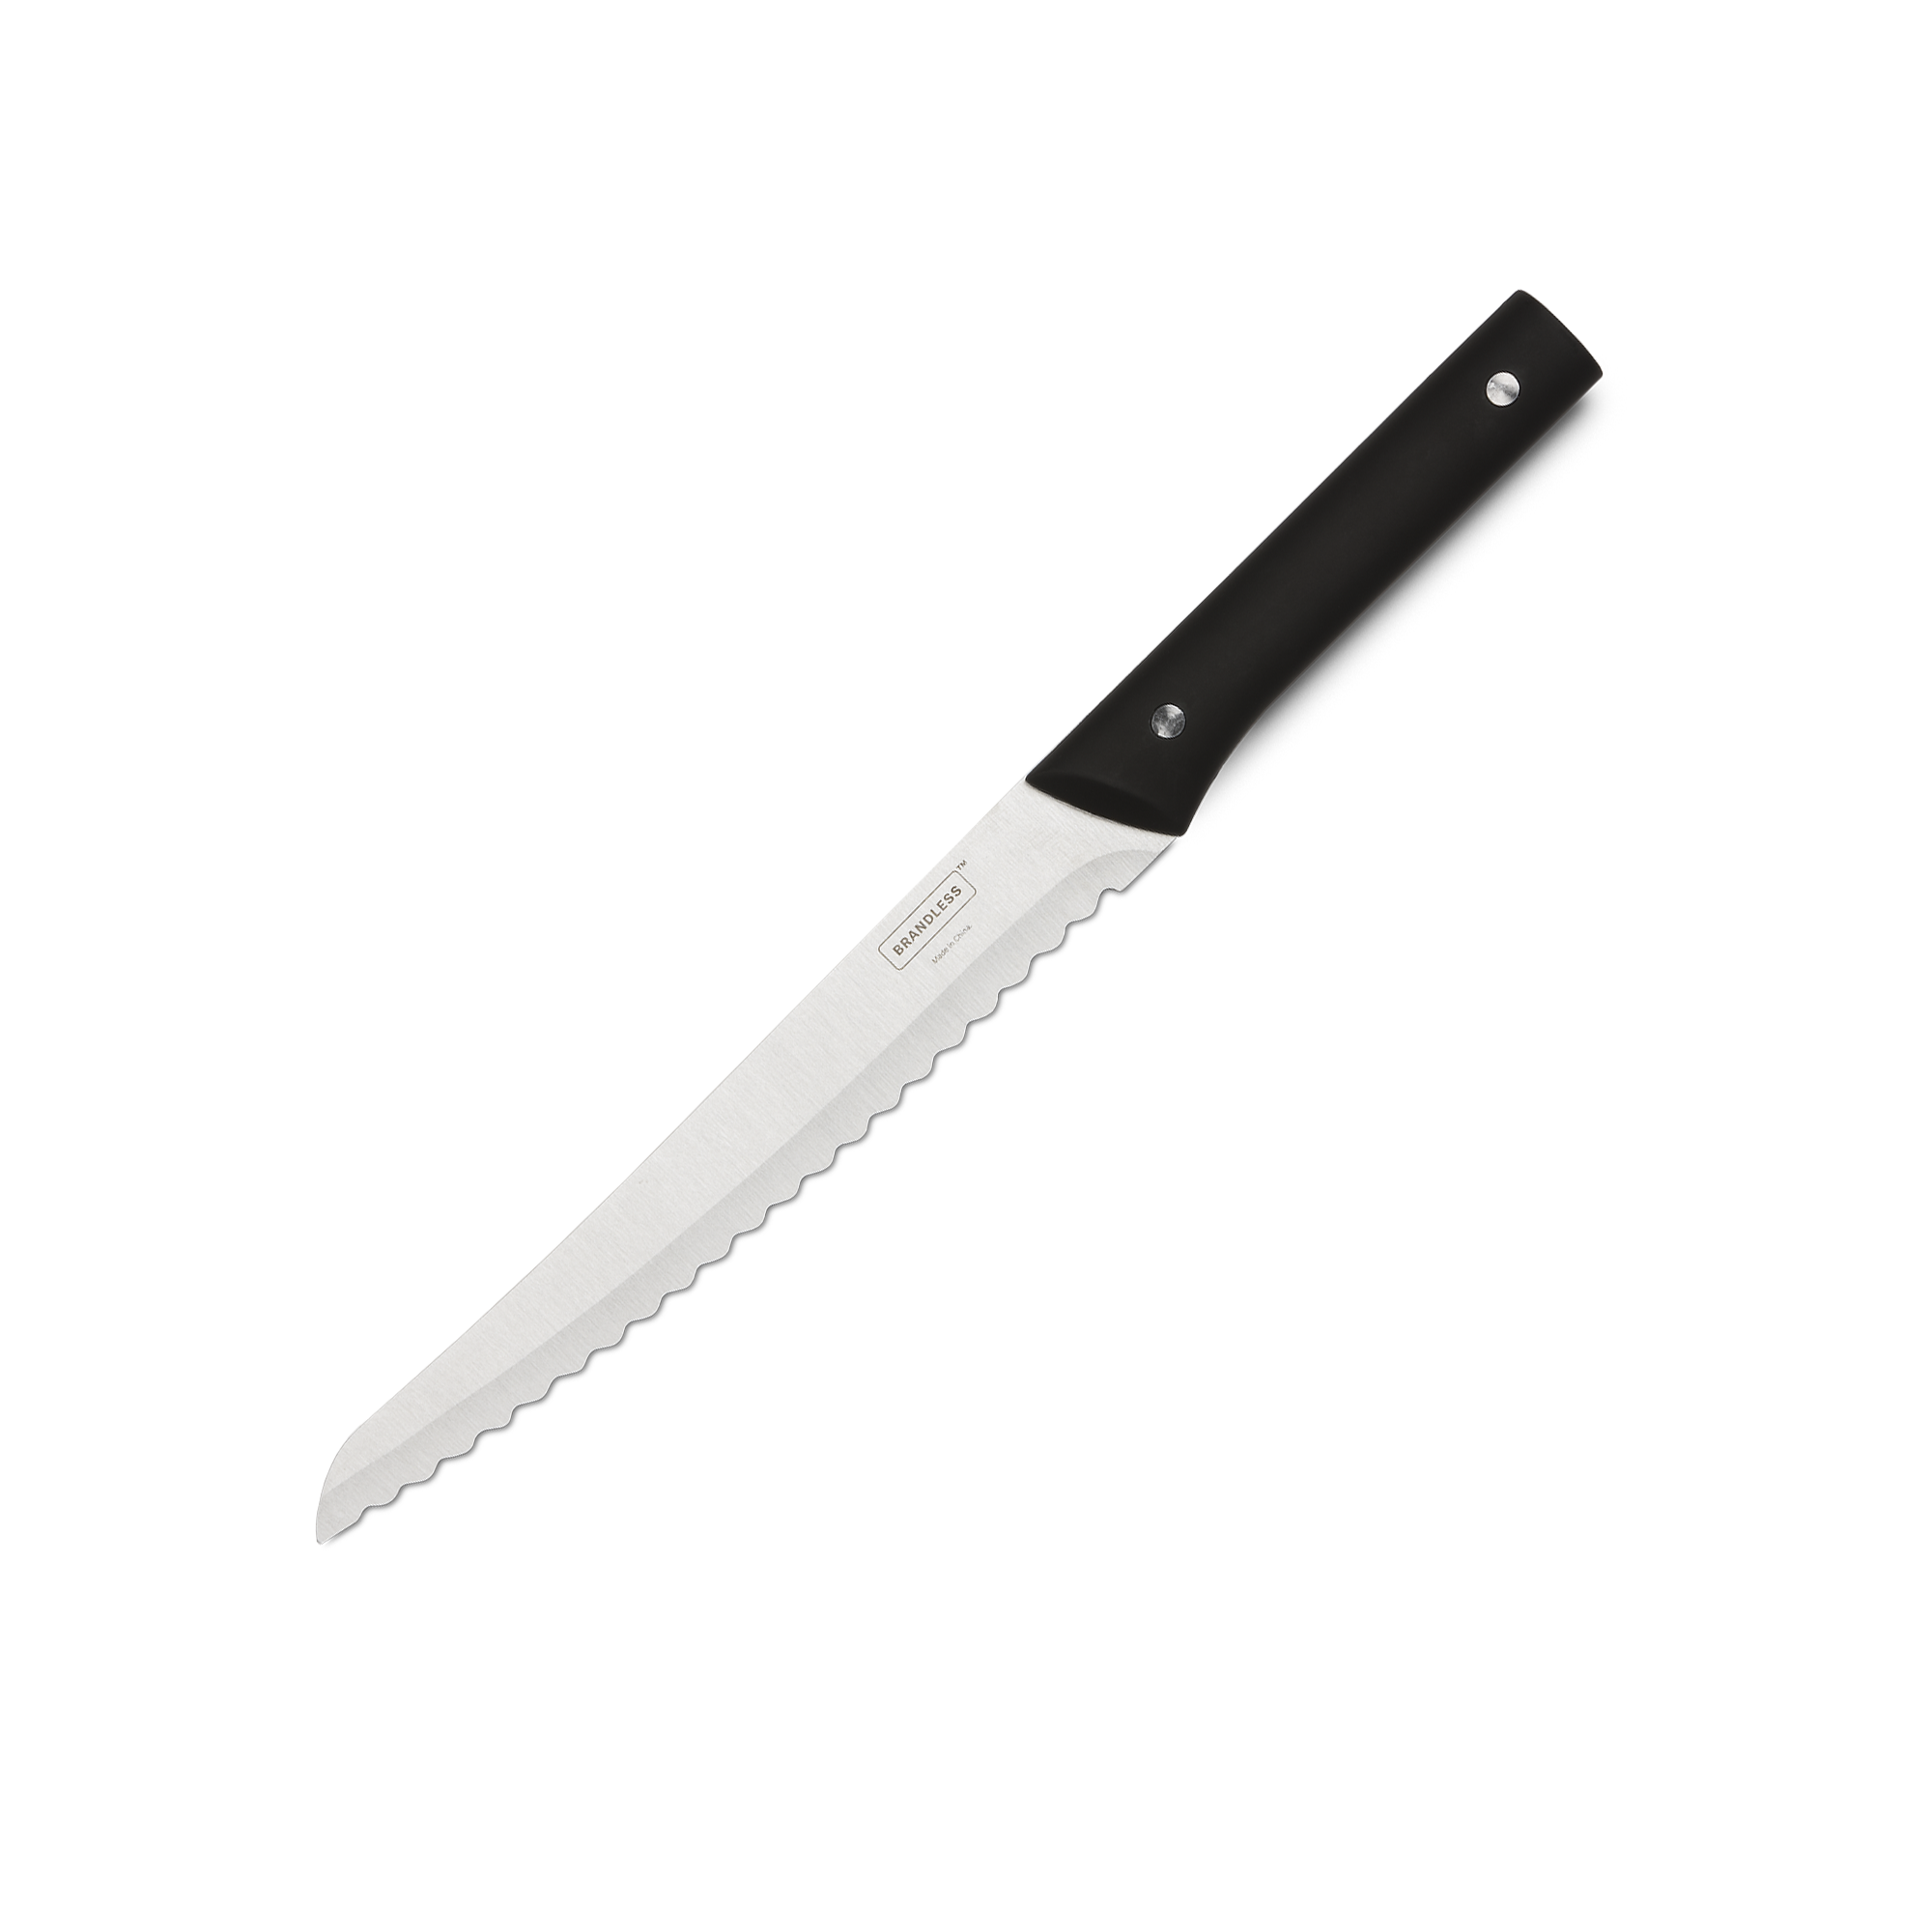 Product photo, 8" bread serrated bread knife with black handle.